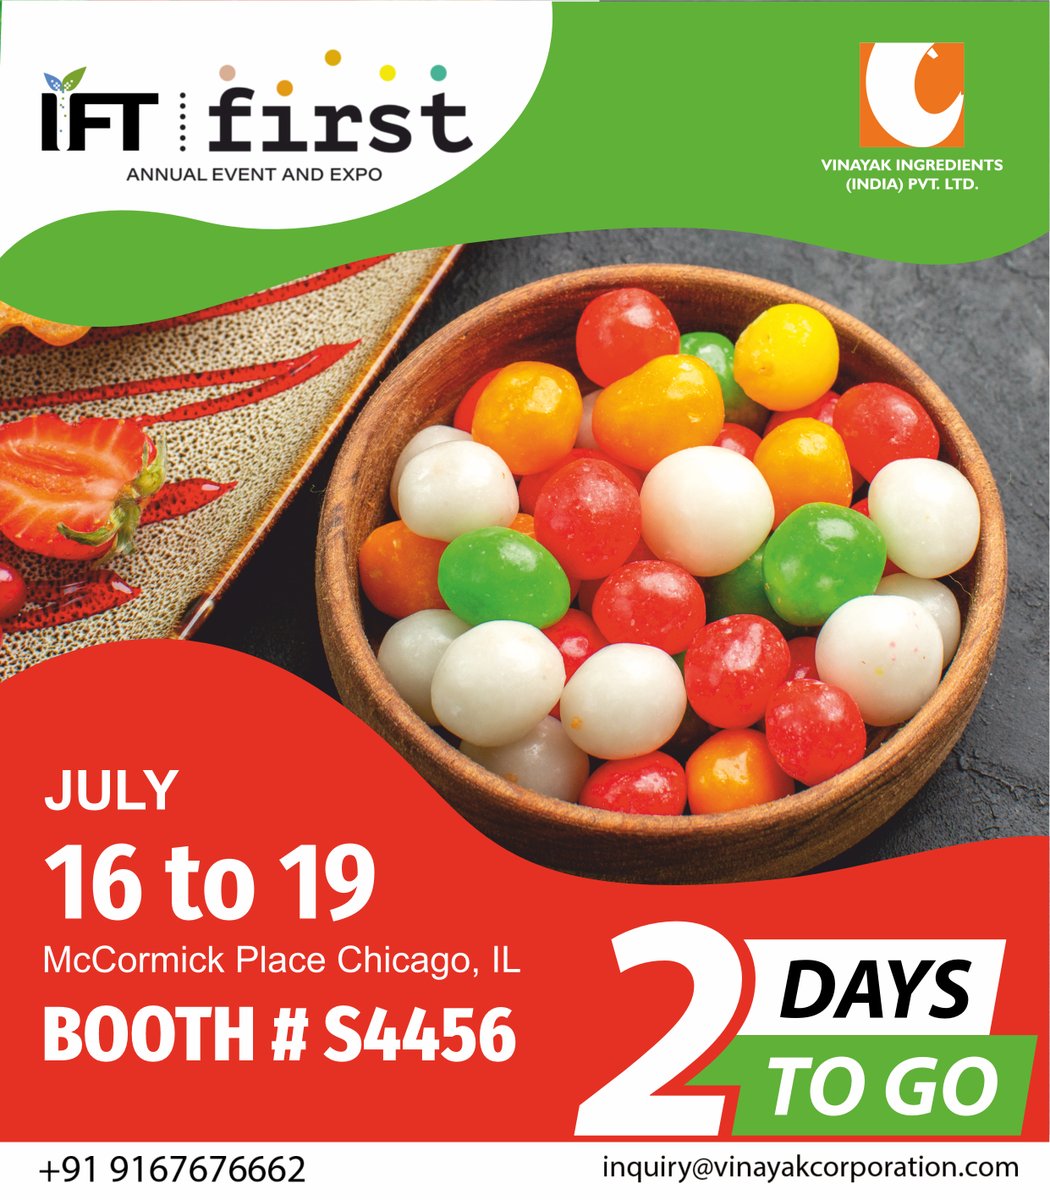 Only 2 days to go! We would like to invite you to our booth to explore a wide range of plant-based ingredients.

See you there! #IFT2023
#IFT #VinayakCorporation #VinayakIngredients #JoinUs #Exhibition2023 #IFTFirst #NaturalFoodColor #India #innovation #future #foodindustry #food